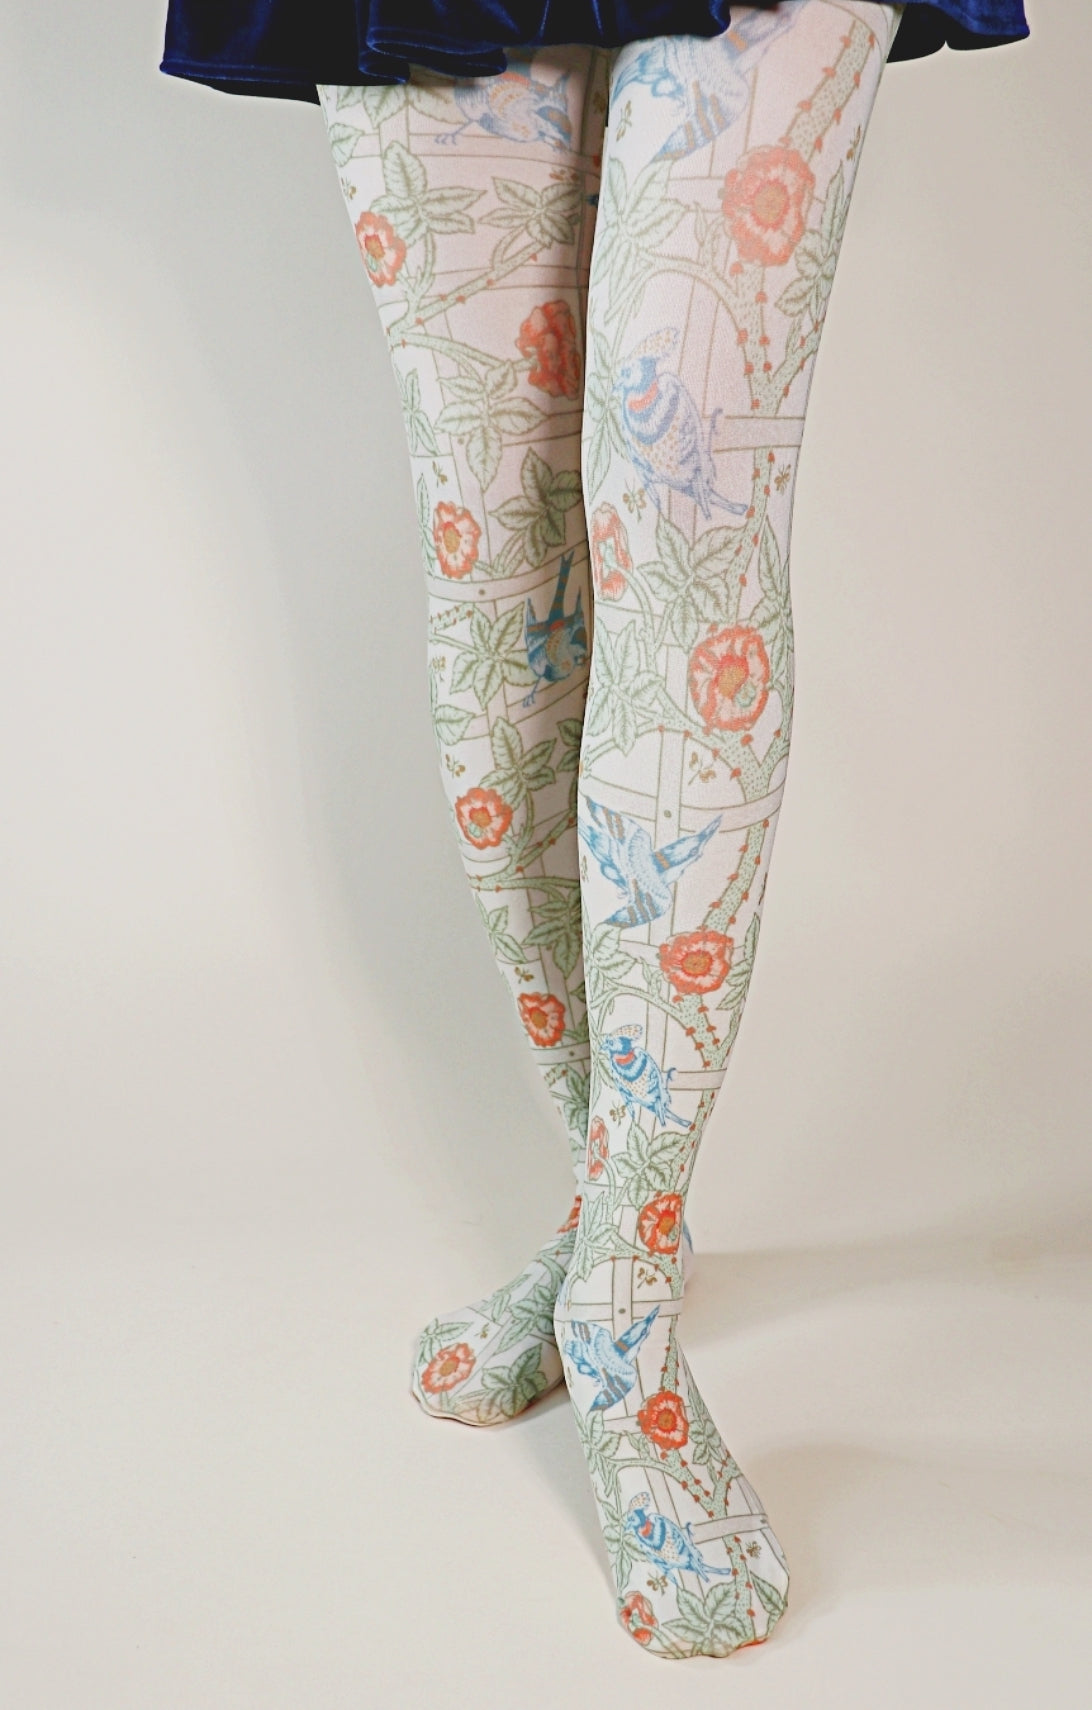 TABBISOCKS brand William Morris collection tights called Trellis or Pomegranate, overall color is dull orange and yellowish green, whitish atmosphere